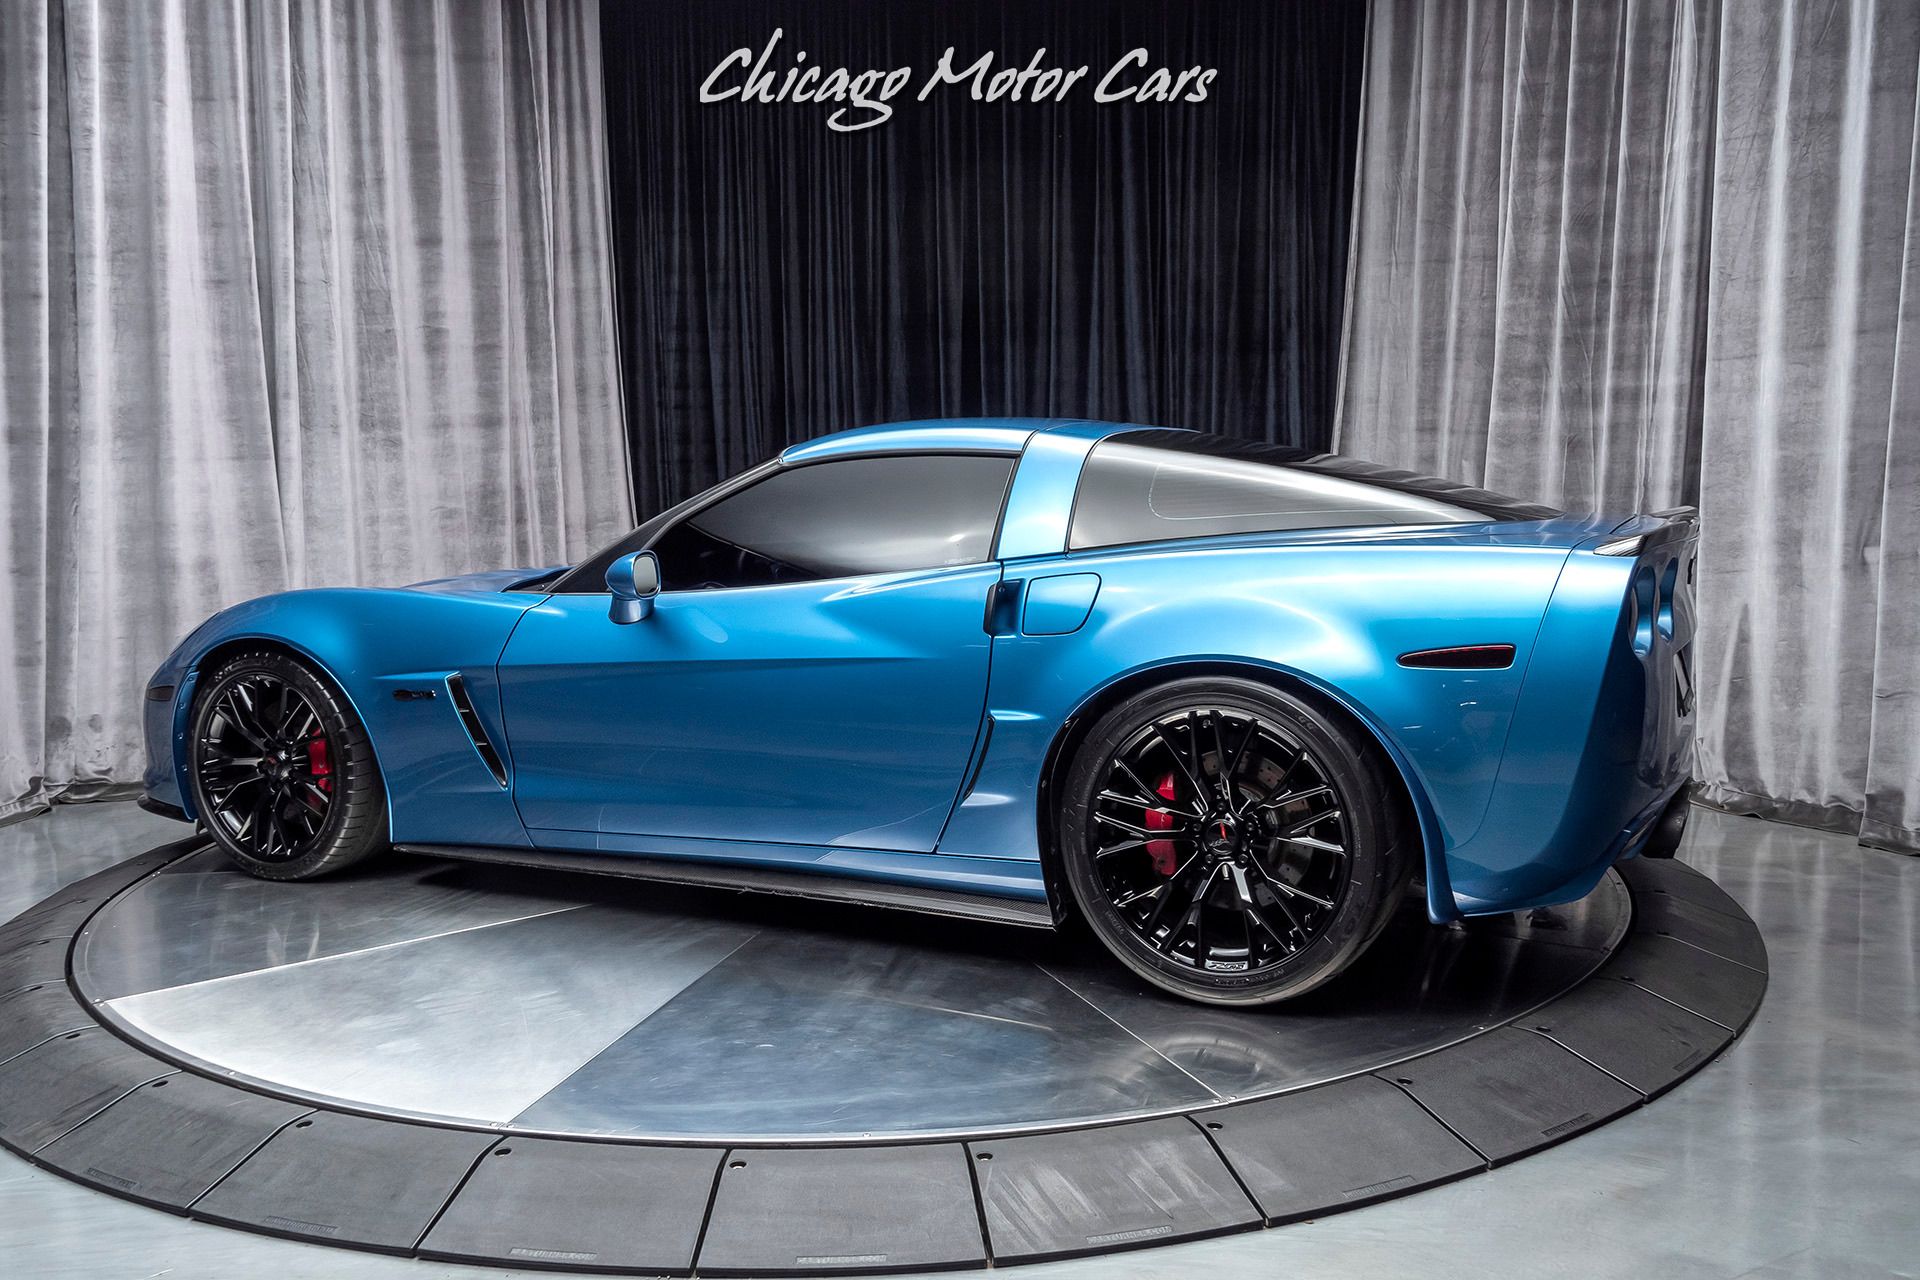 Used-2009-Chevrolet-Corvette-Z06-3LZ-Coupe-850HP-BUILT-ENGINE-LOADED-WITH-TASTEFUL-UPGRADES